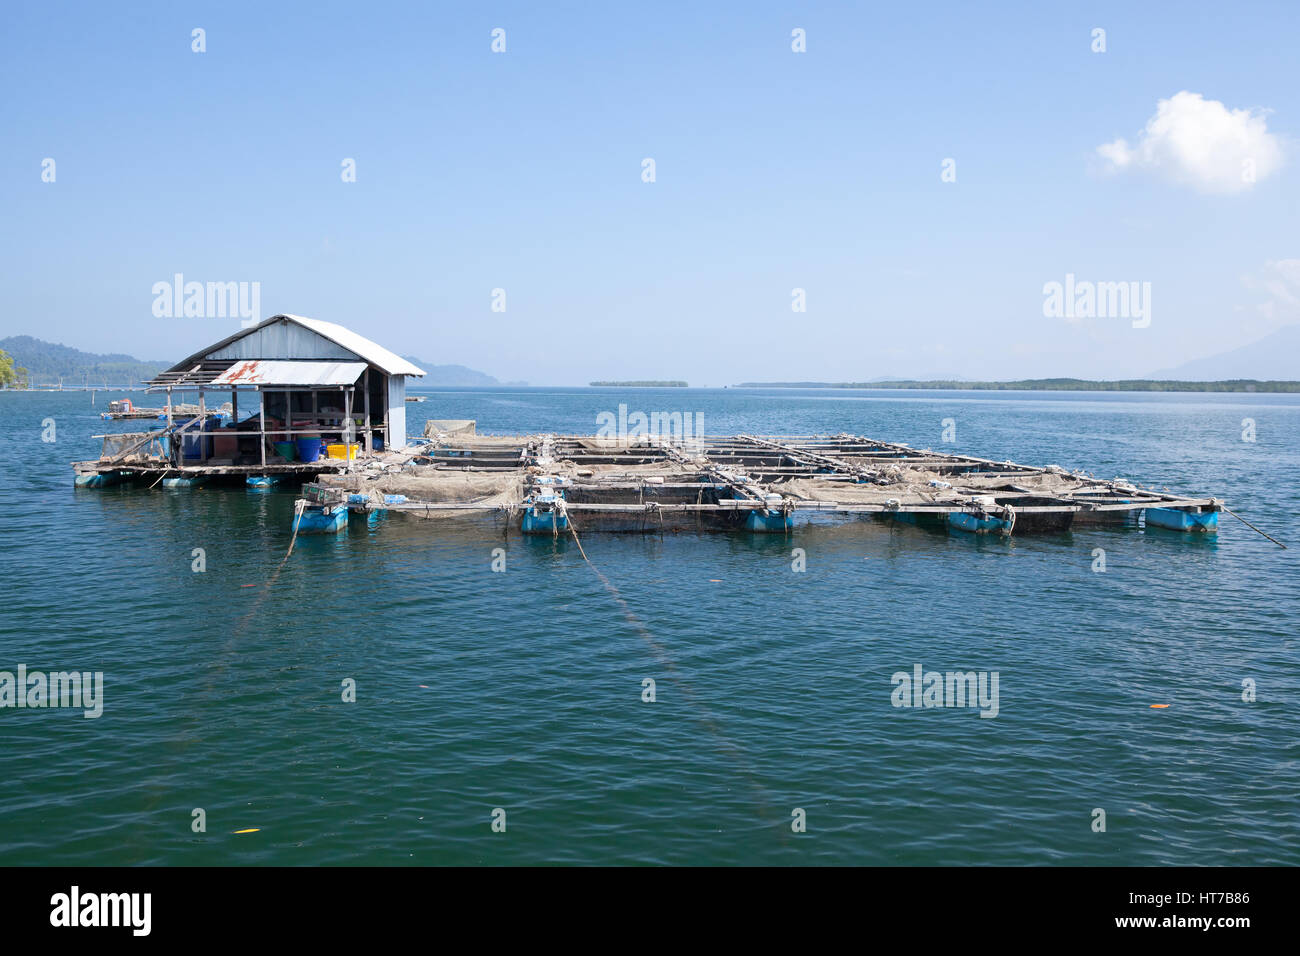 https://c8.alamy.com/comp/HT7B86/fishes-underwater-fish-cage-farming-or-floating-basket-for-keeping-HT7B86.jpg